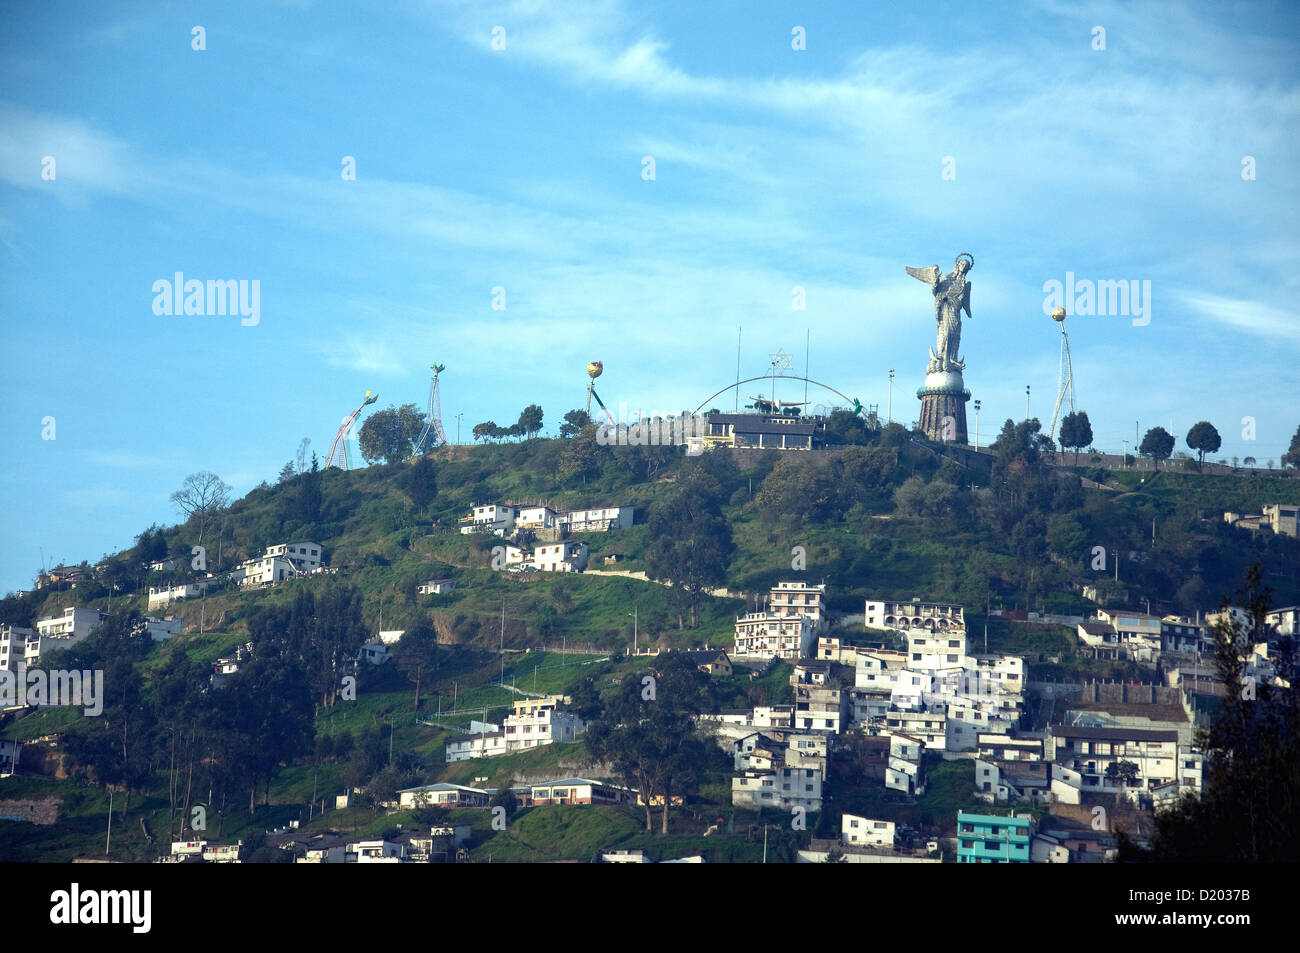 La Virgen del Panecillo, a winged Virgin or Madonna figure, sits atop a hill on the outskirts of Quiito, Ecuador's capital Stock Photo